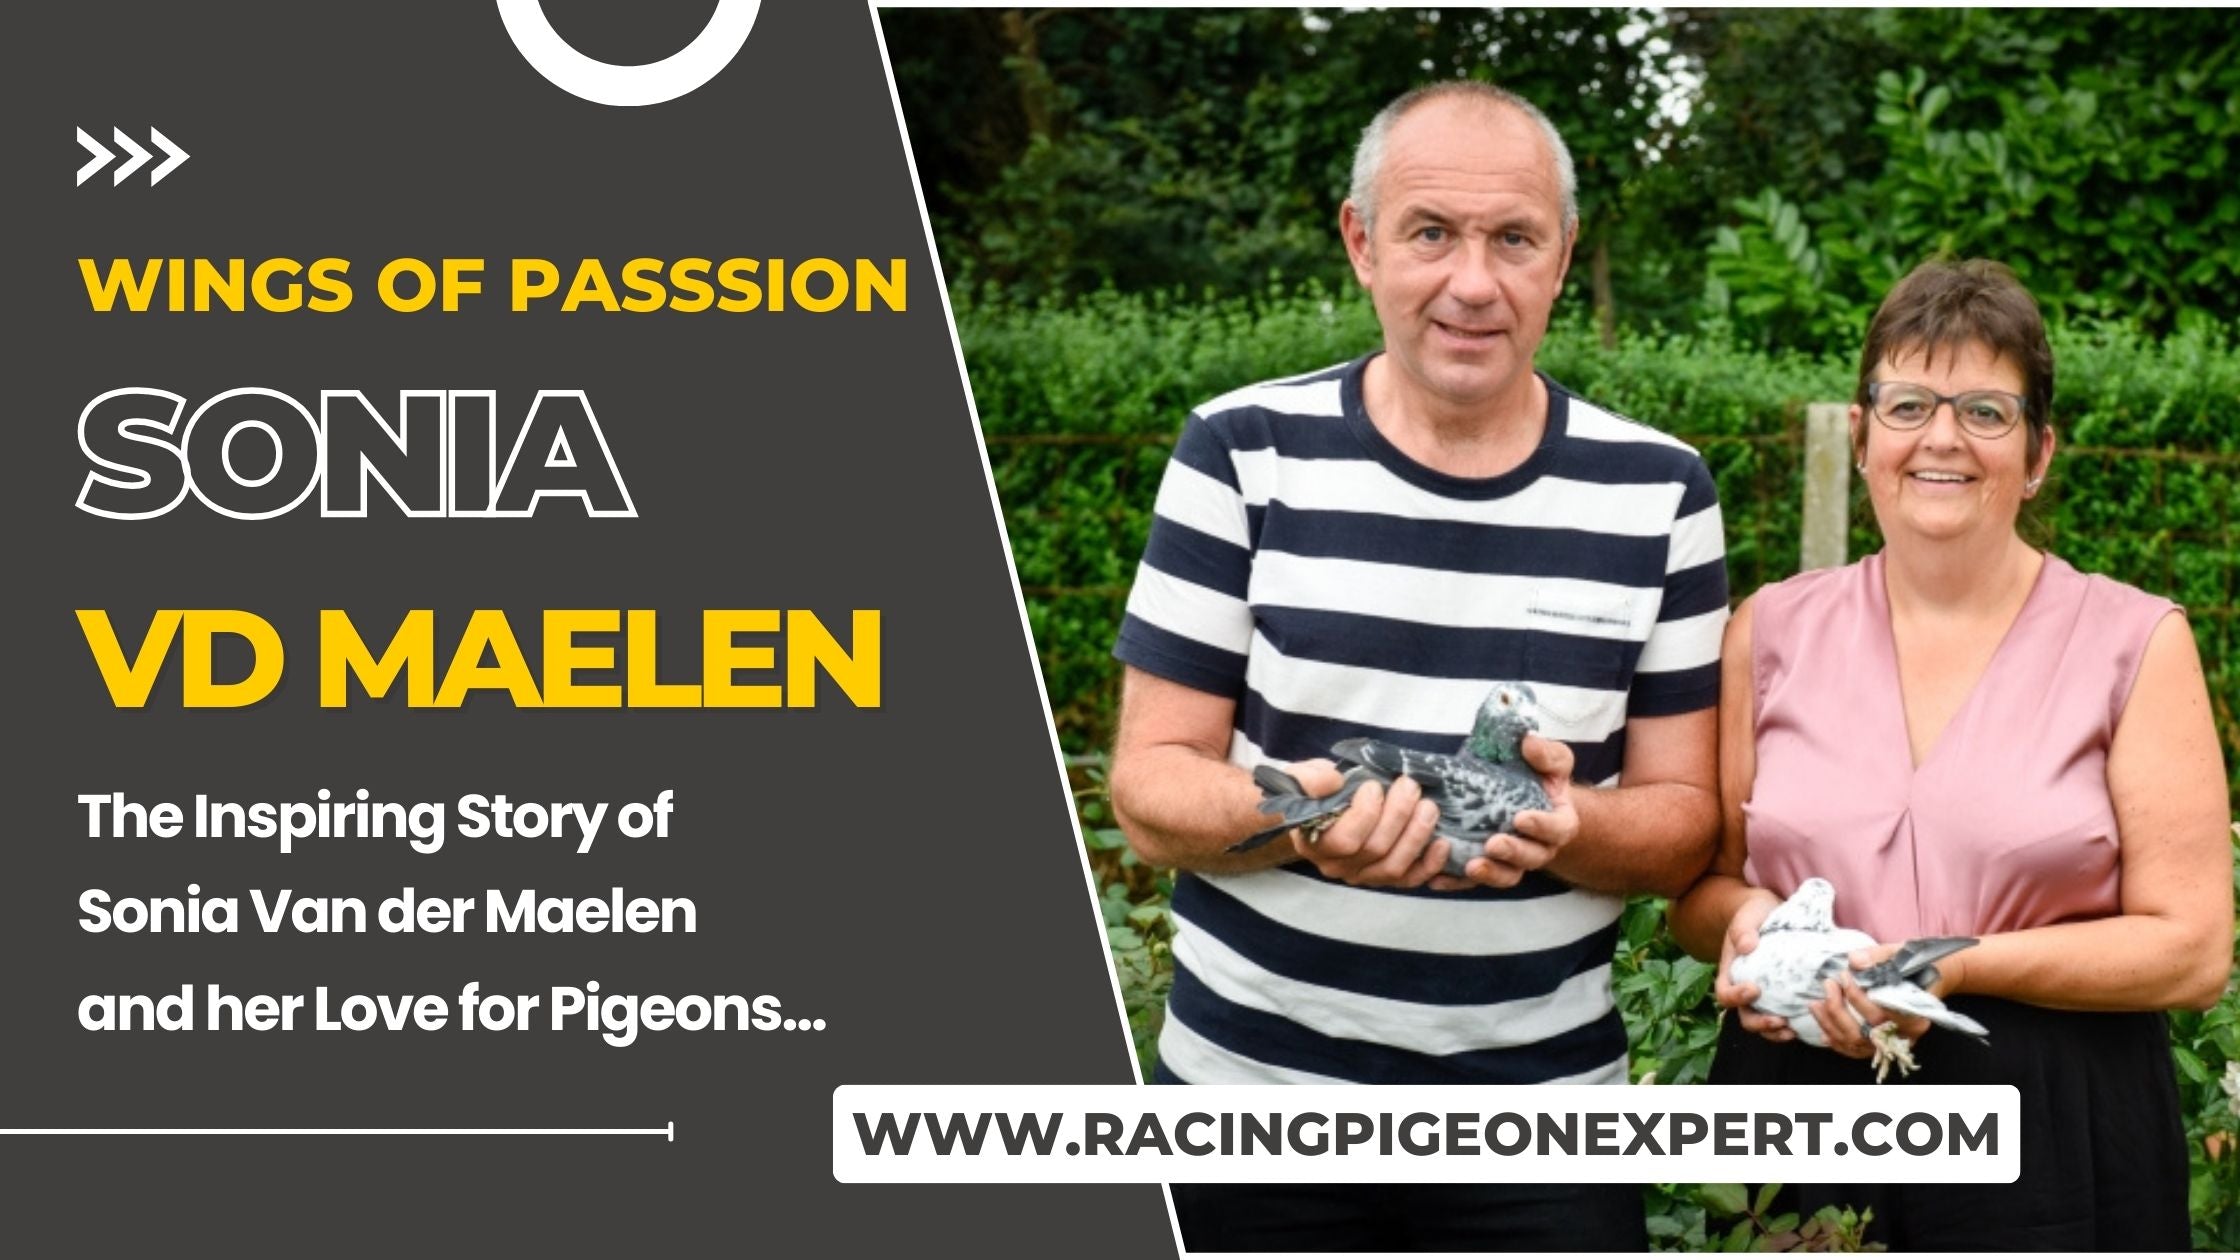 Wings of Passion: The Inspiring Story of Sonia Van der Maelen and Her Love for Homing Pigeons